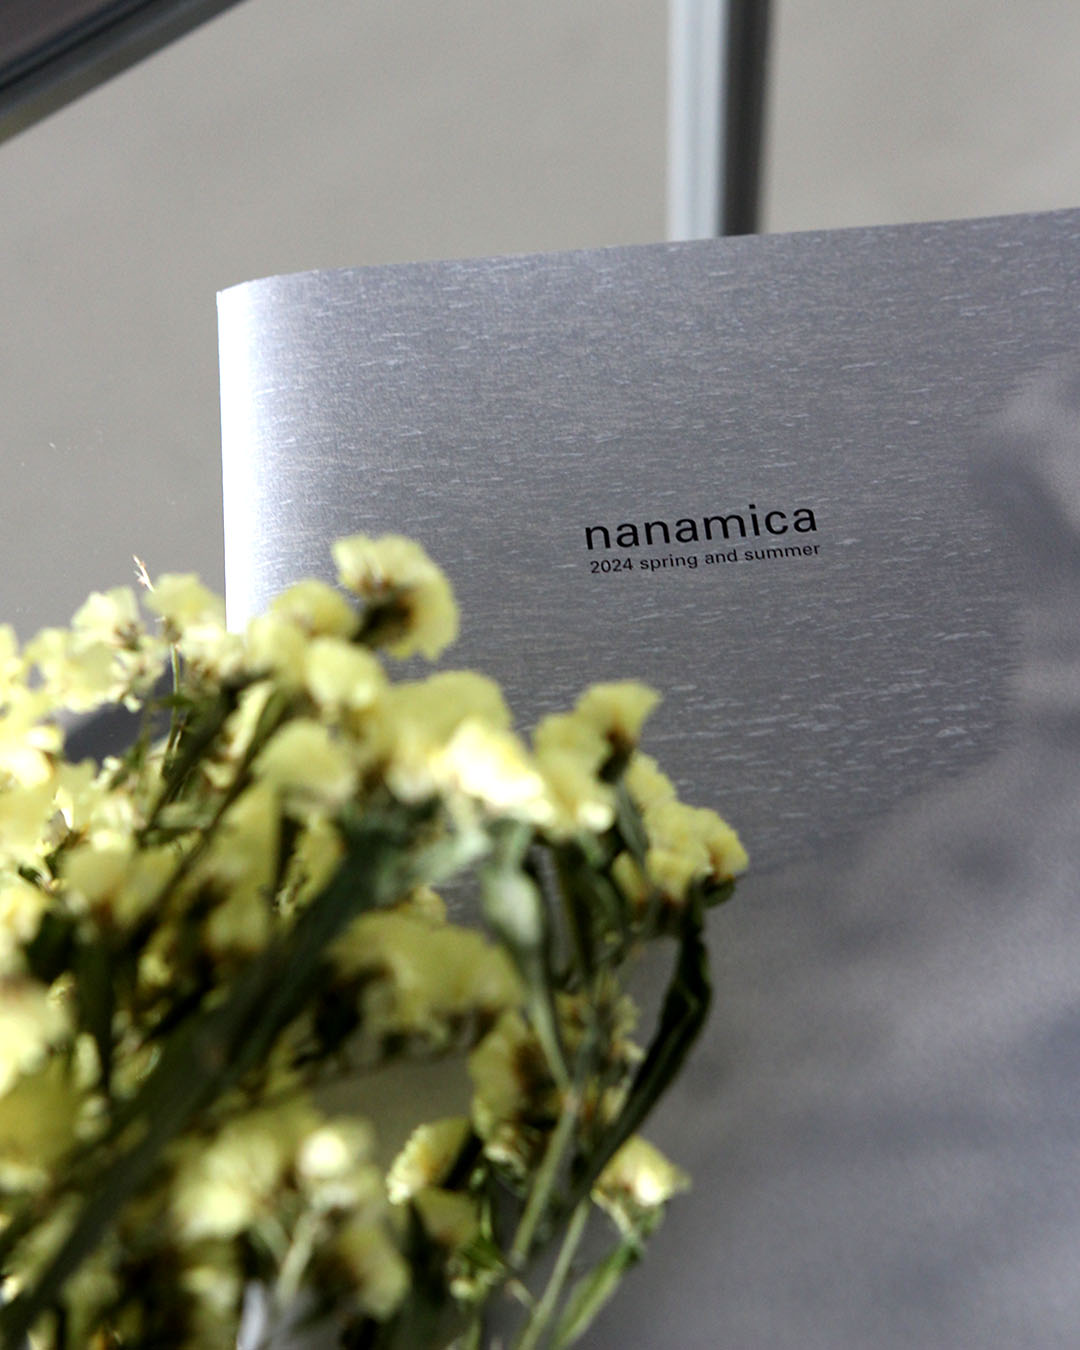 nanamica 2024 spring and summer catalog has arrive…